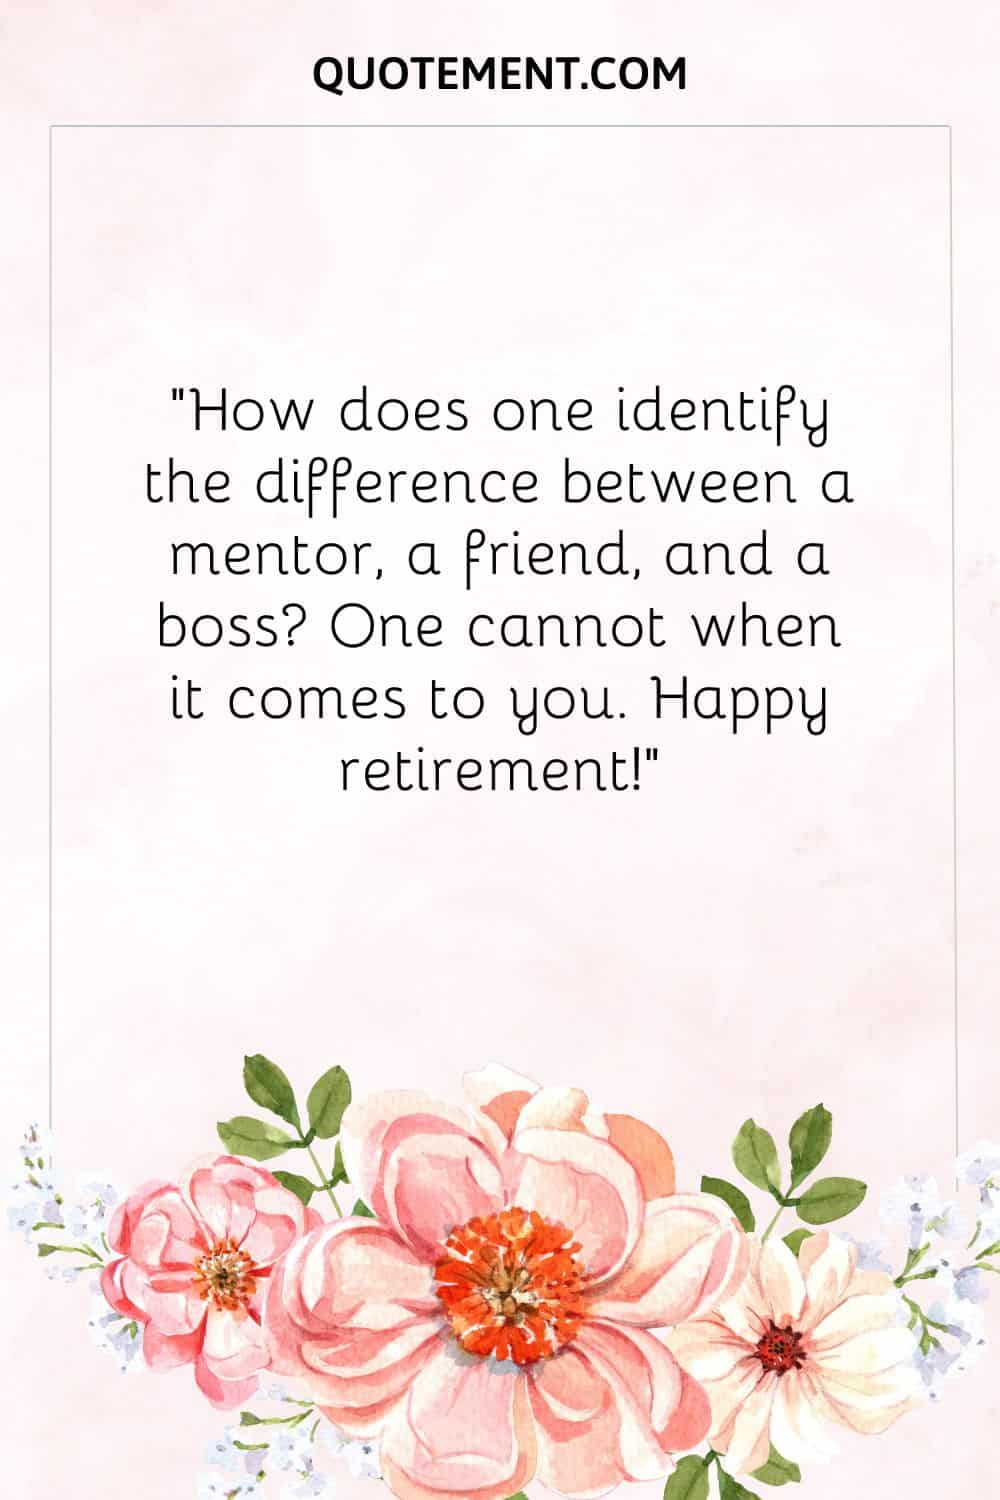 How does one identify the difference between a mentor, a friend, and a boss